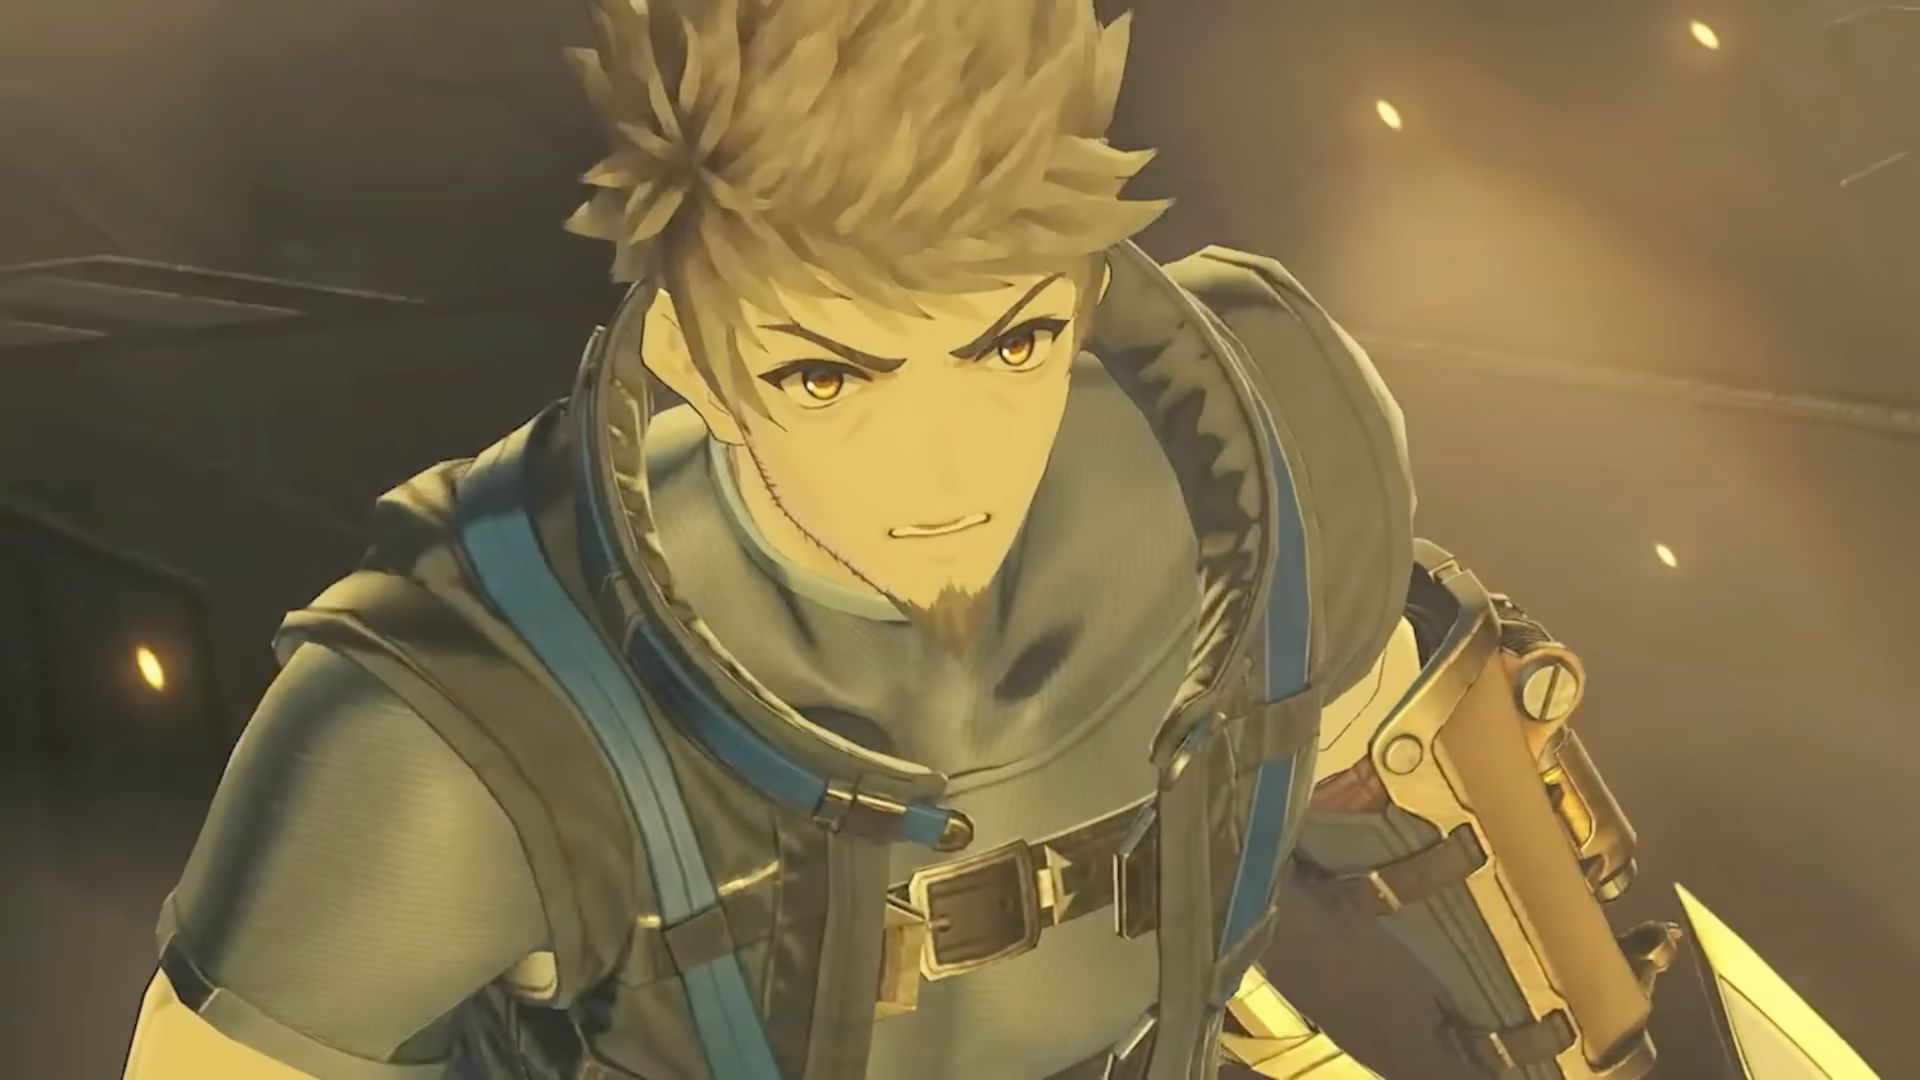 Xenoblade Chronicles 3: Future Redeemed DLC fully revealed, out this month